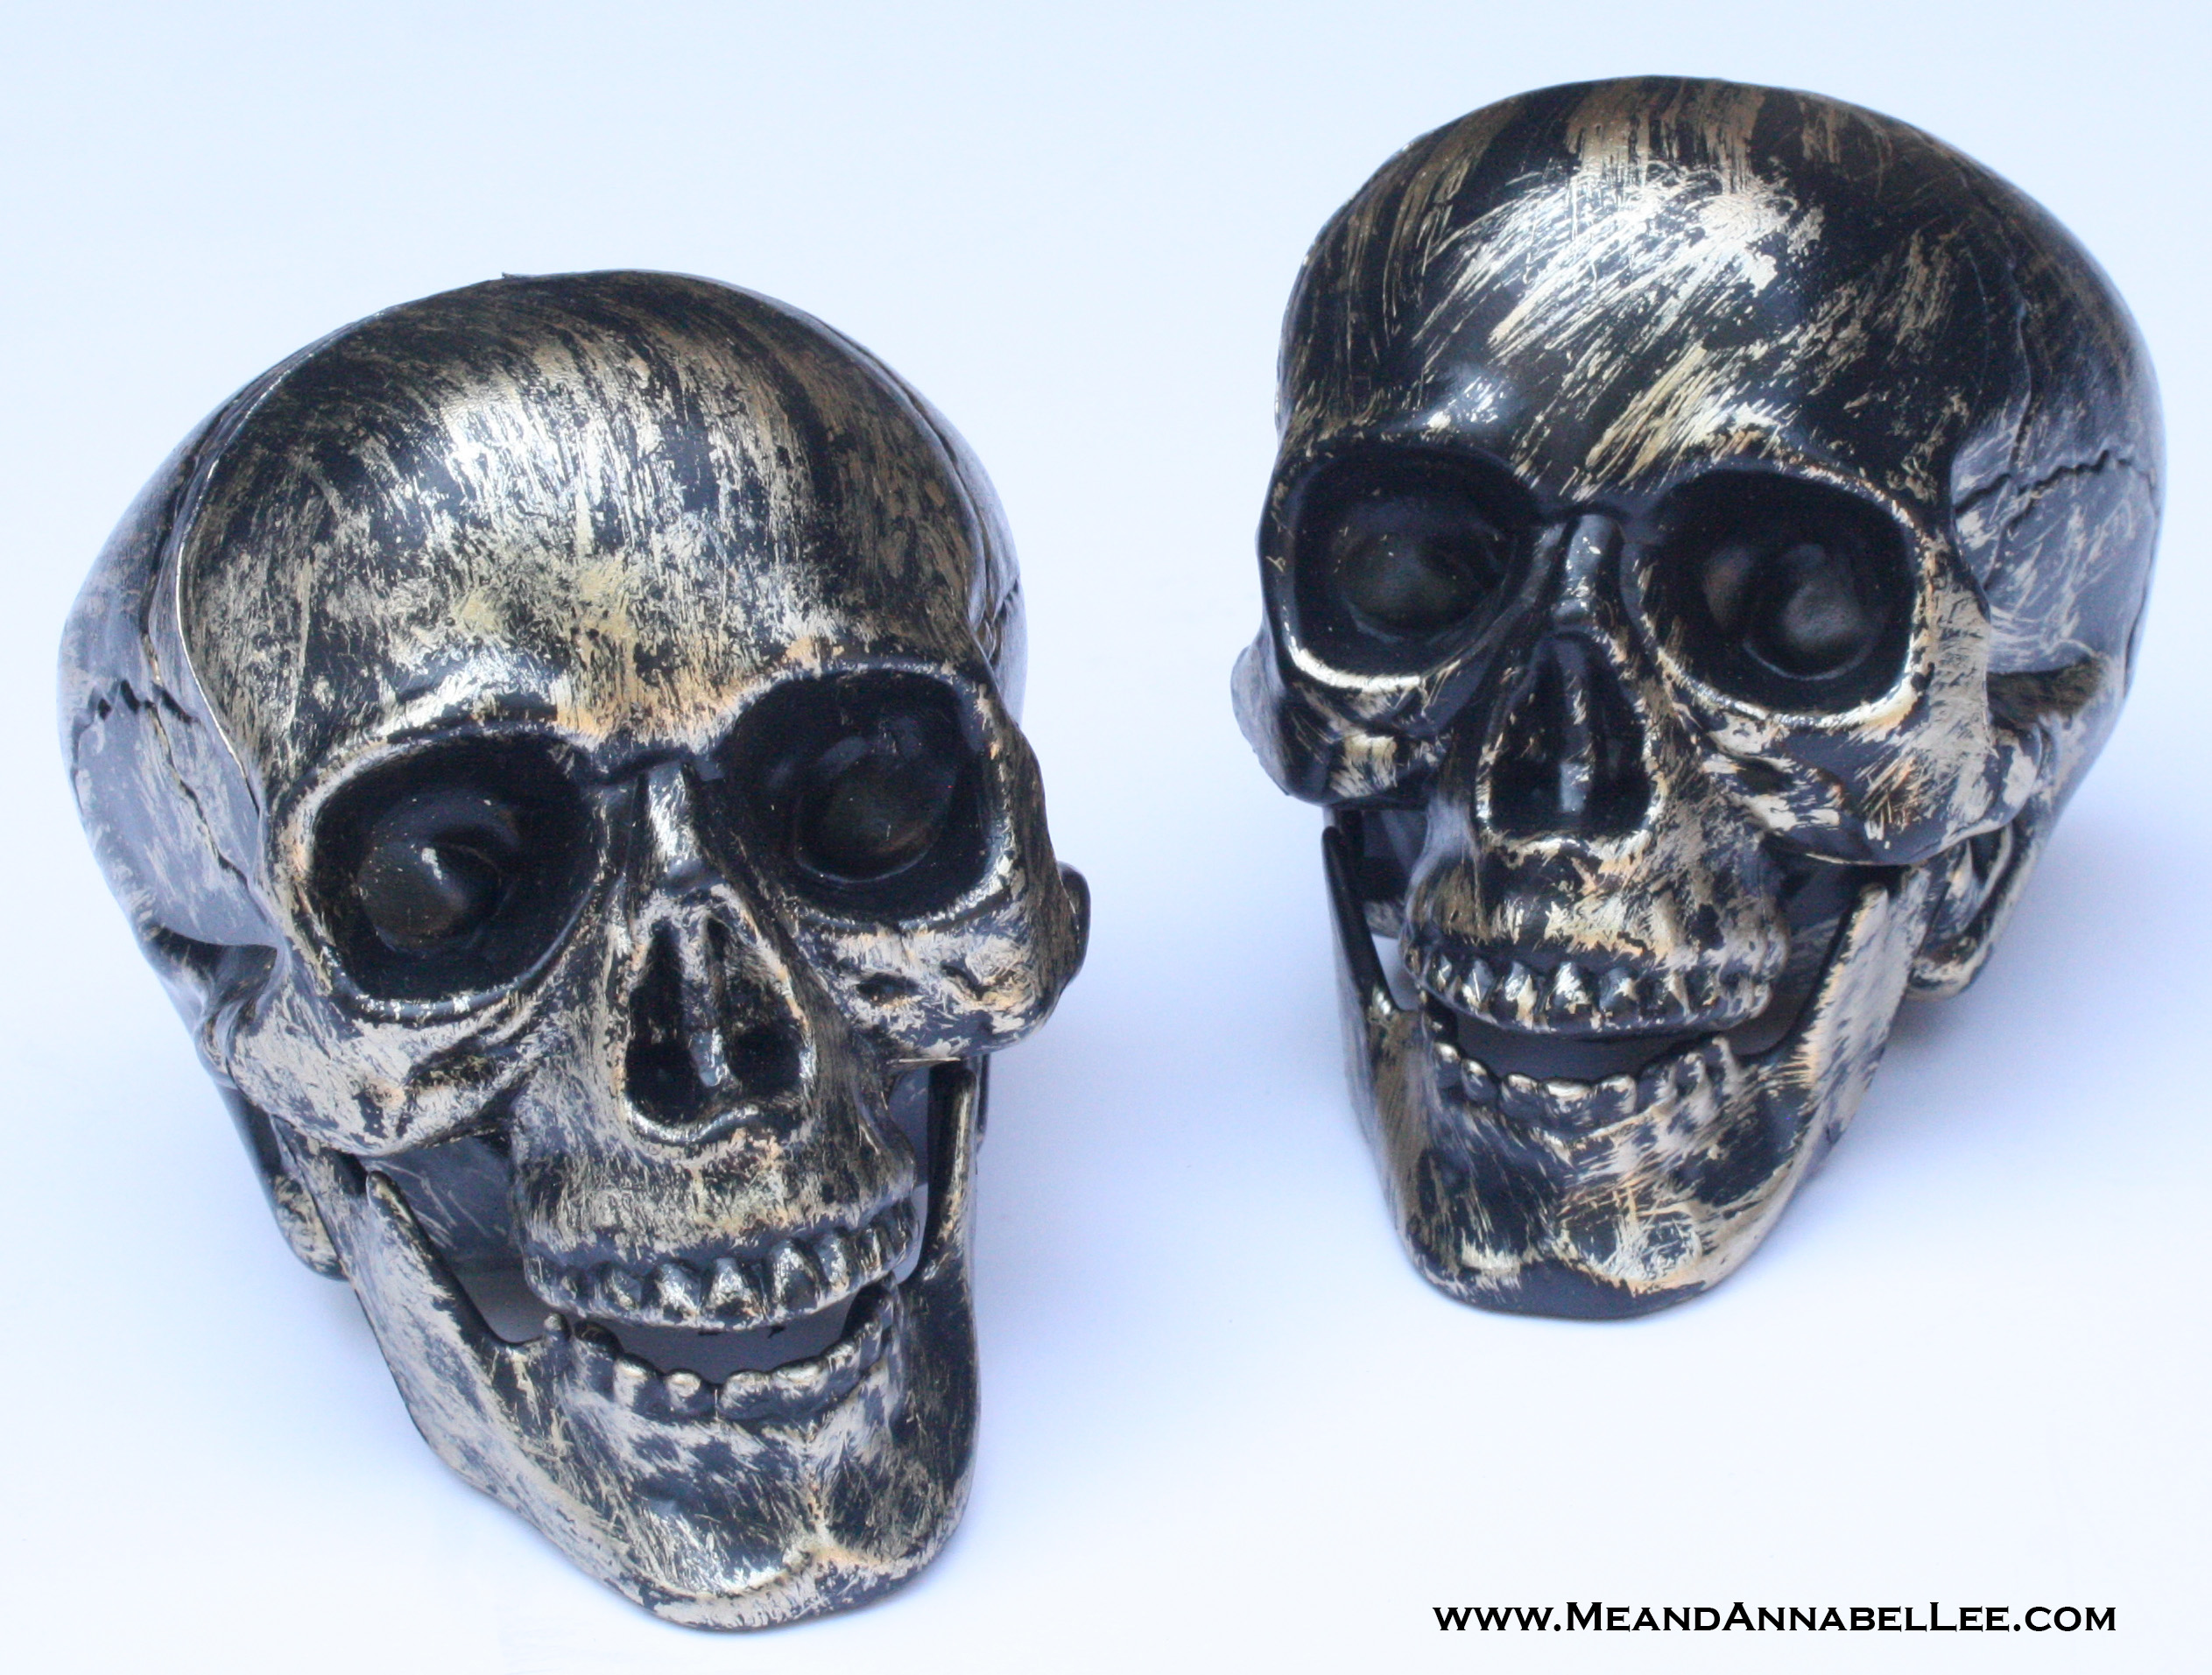 Build a DIY Gothic Skull Chalkboard Stand with these plastic skulls from Michaels Stores | Halloween Crafts | www.MeandAnnabelLee.com